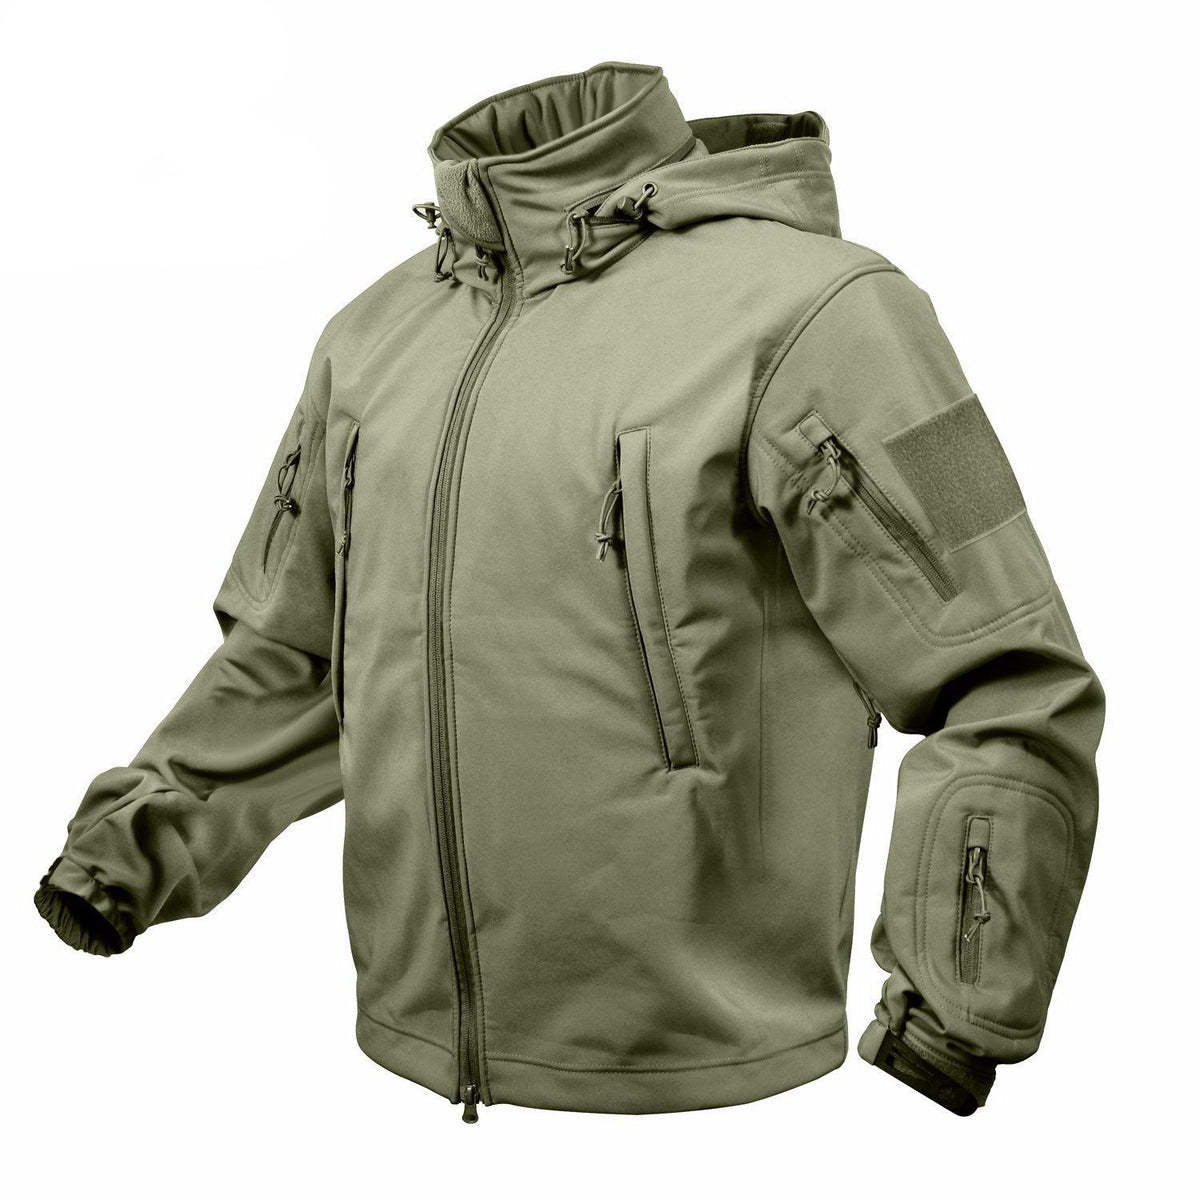 Special Ops Soft-Shell Tactical Jacket – Outdoor King